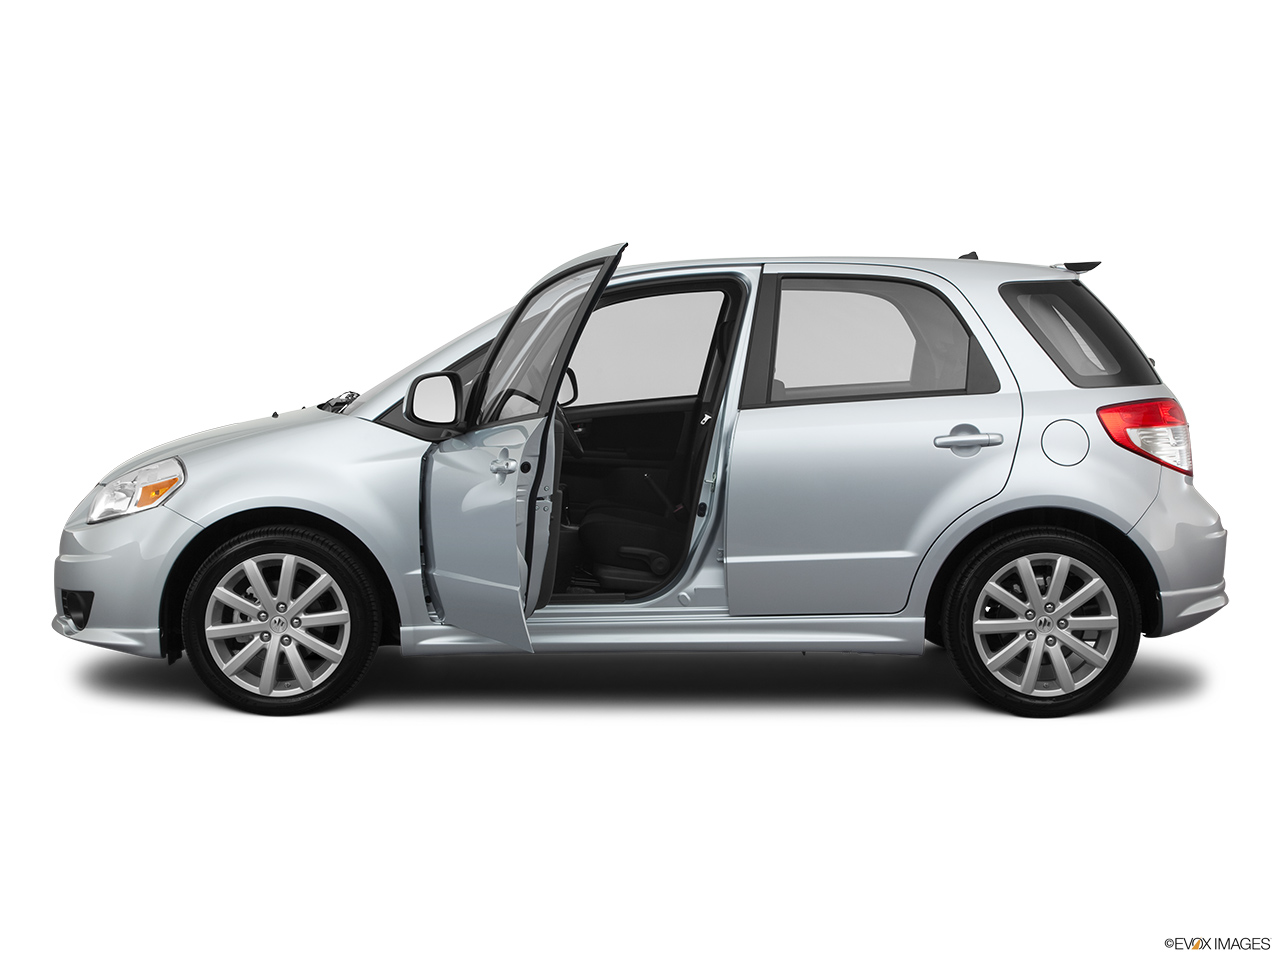 2011 Suzuki SX4 Sportback Technology Driver's side profile with drivers side door open. 